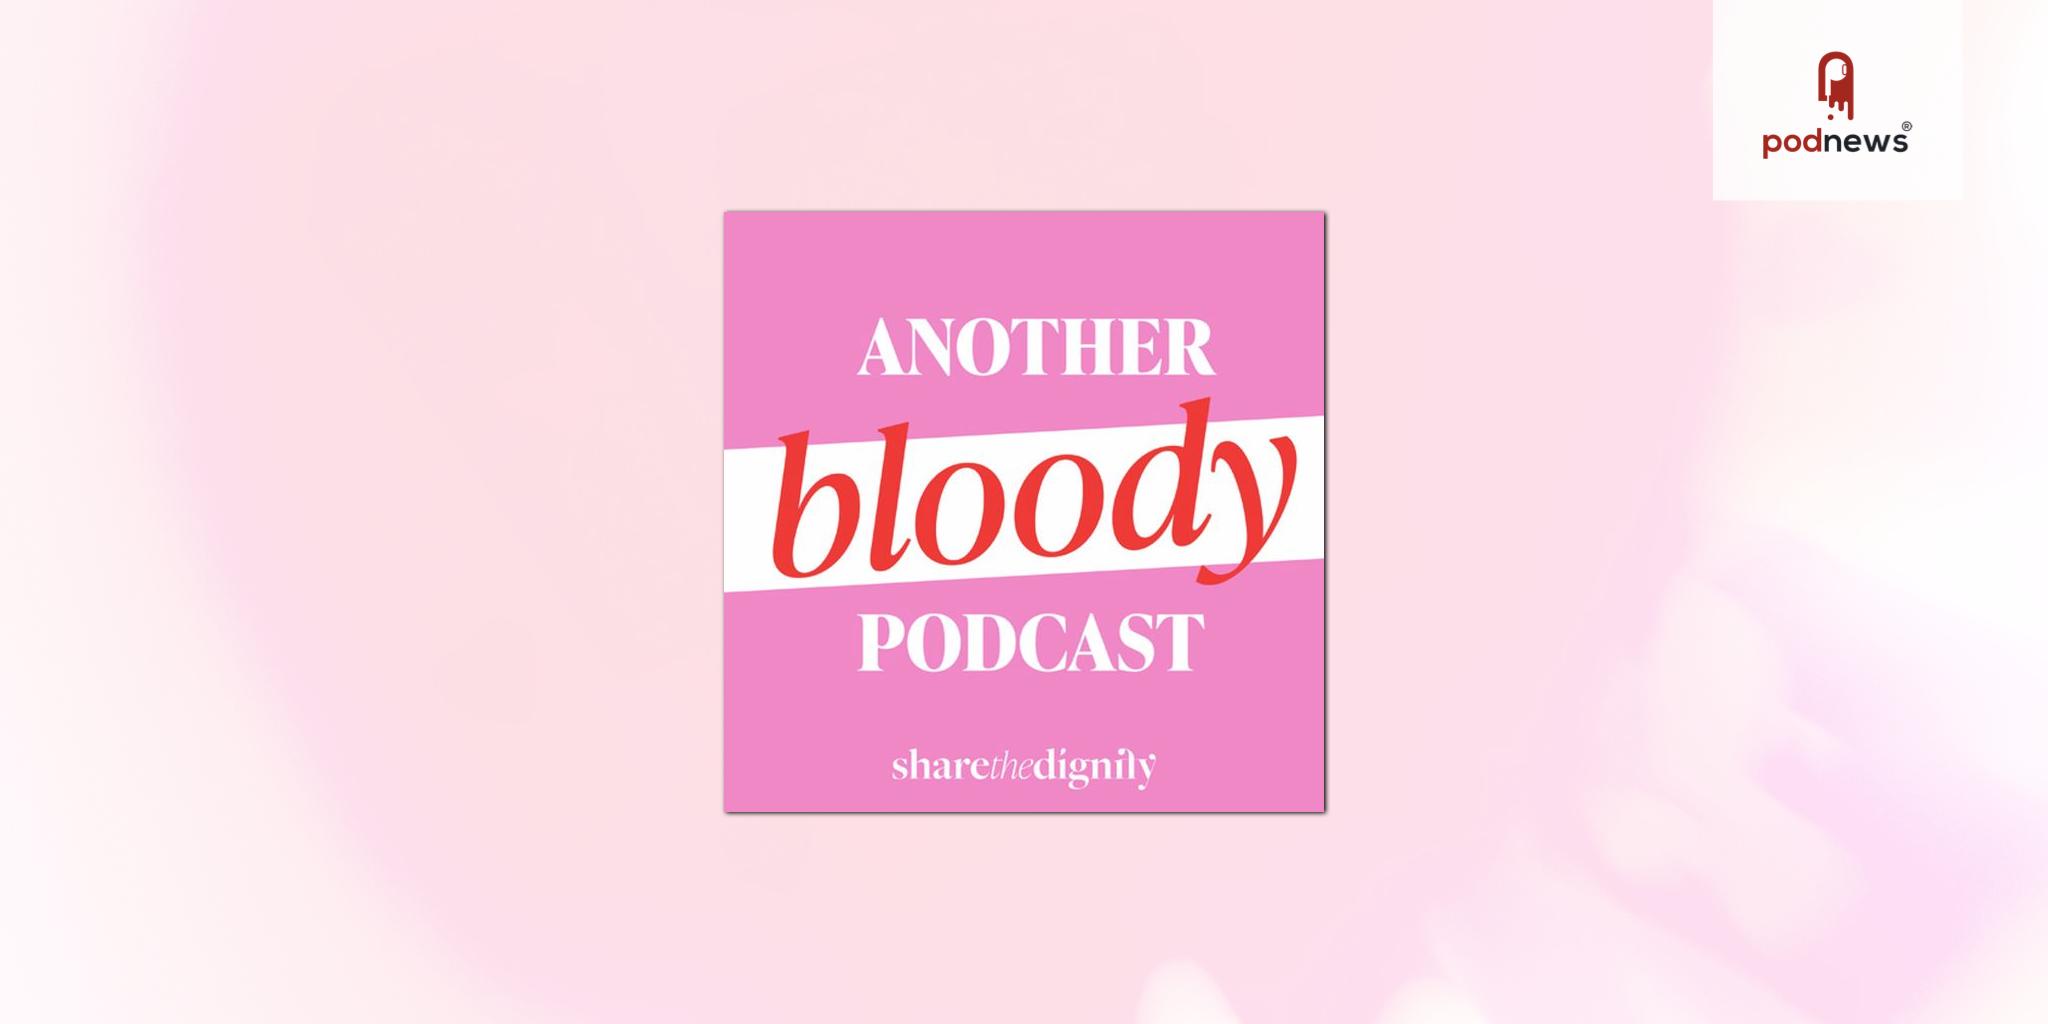 A Press Release About Another Bloody Podcast